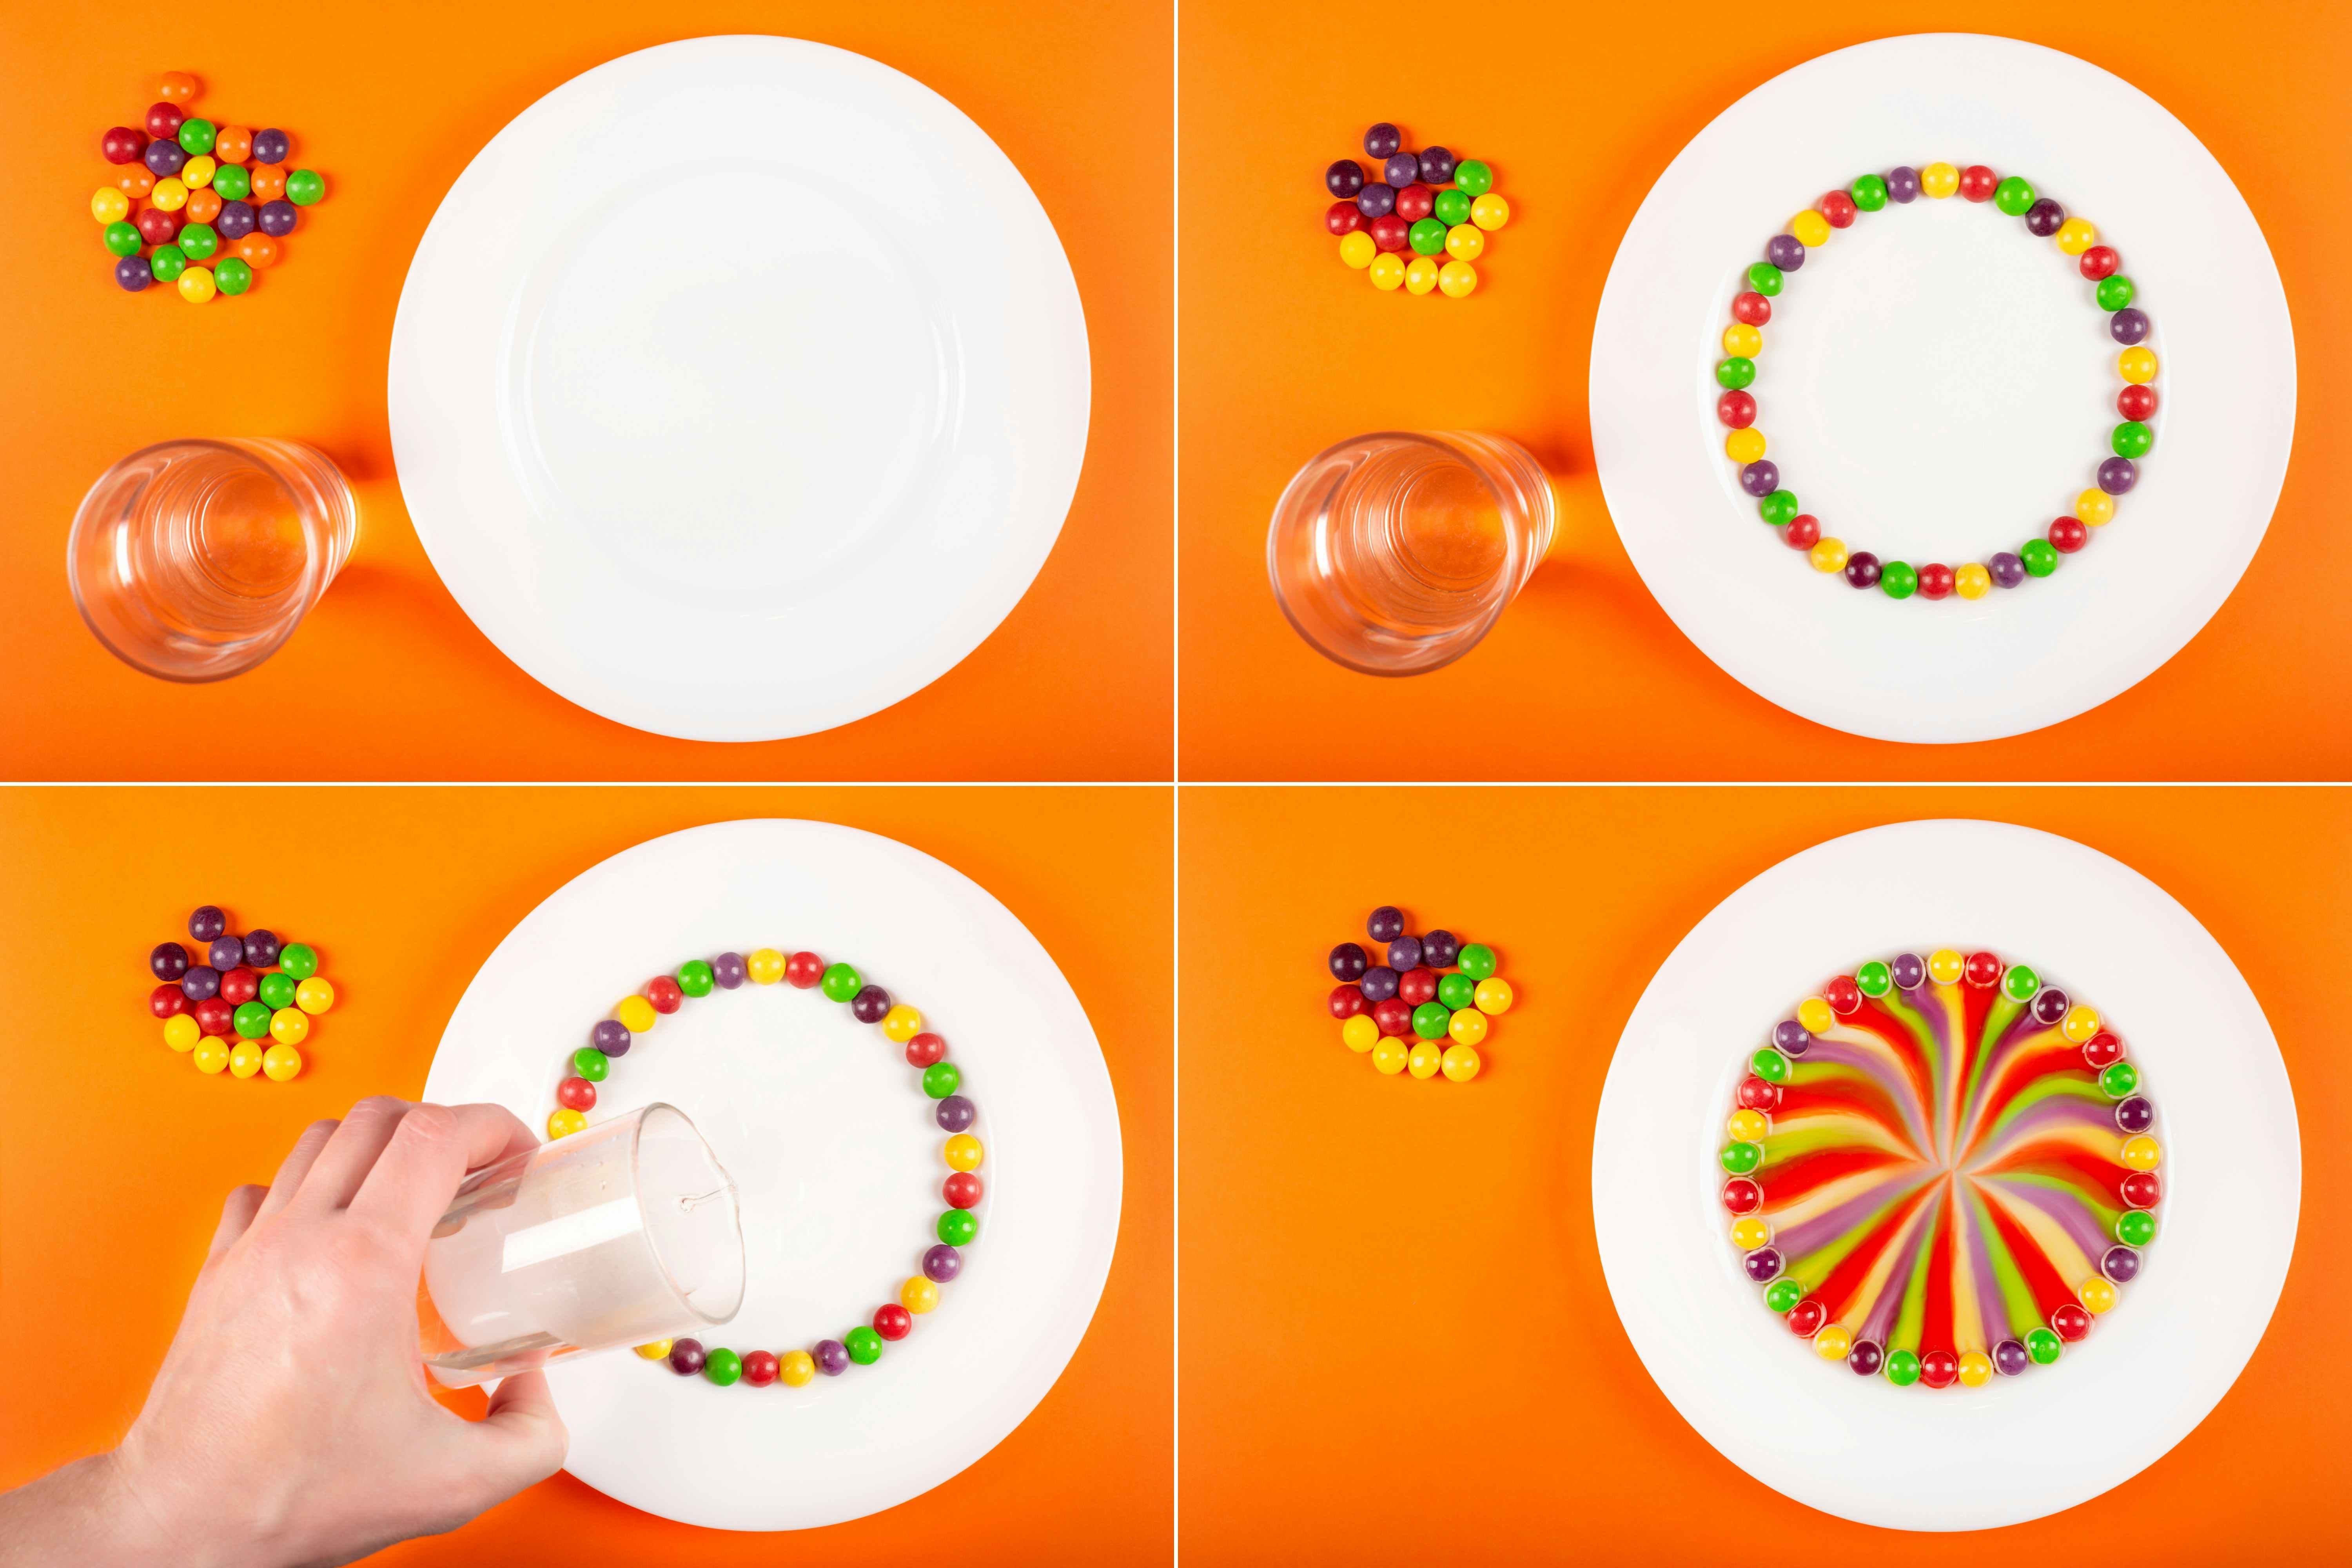 A four step tutorial showing a person lining Skittles in a circle on a plate, and pouring water in the center so they dissolve in a swirl pattern.